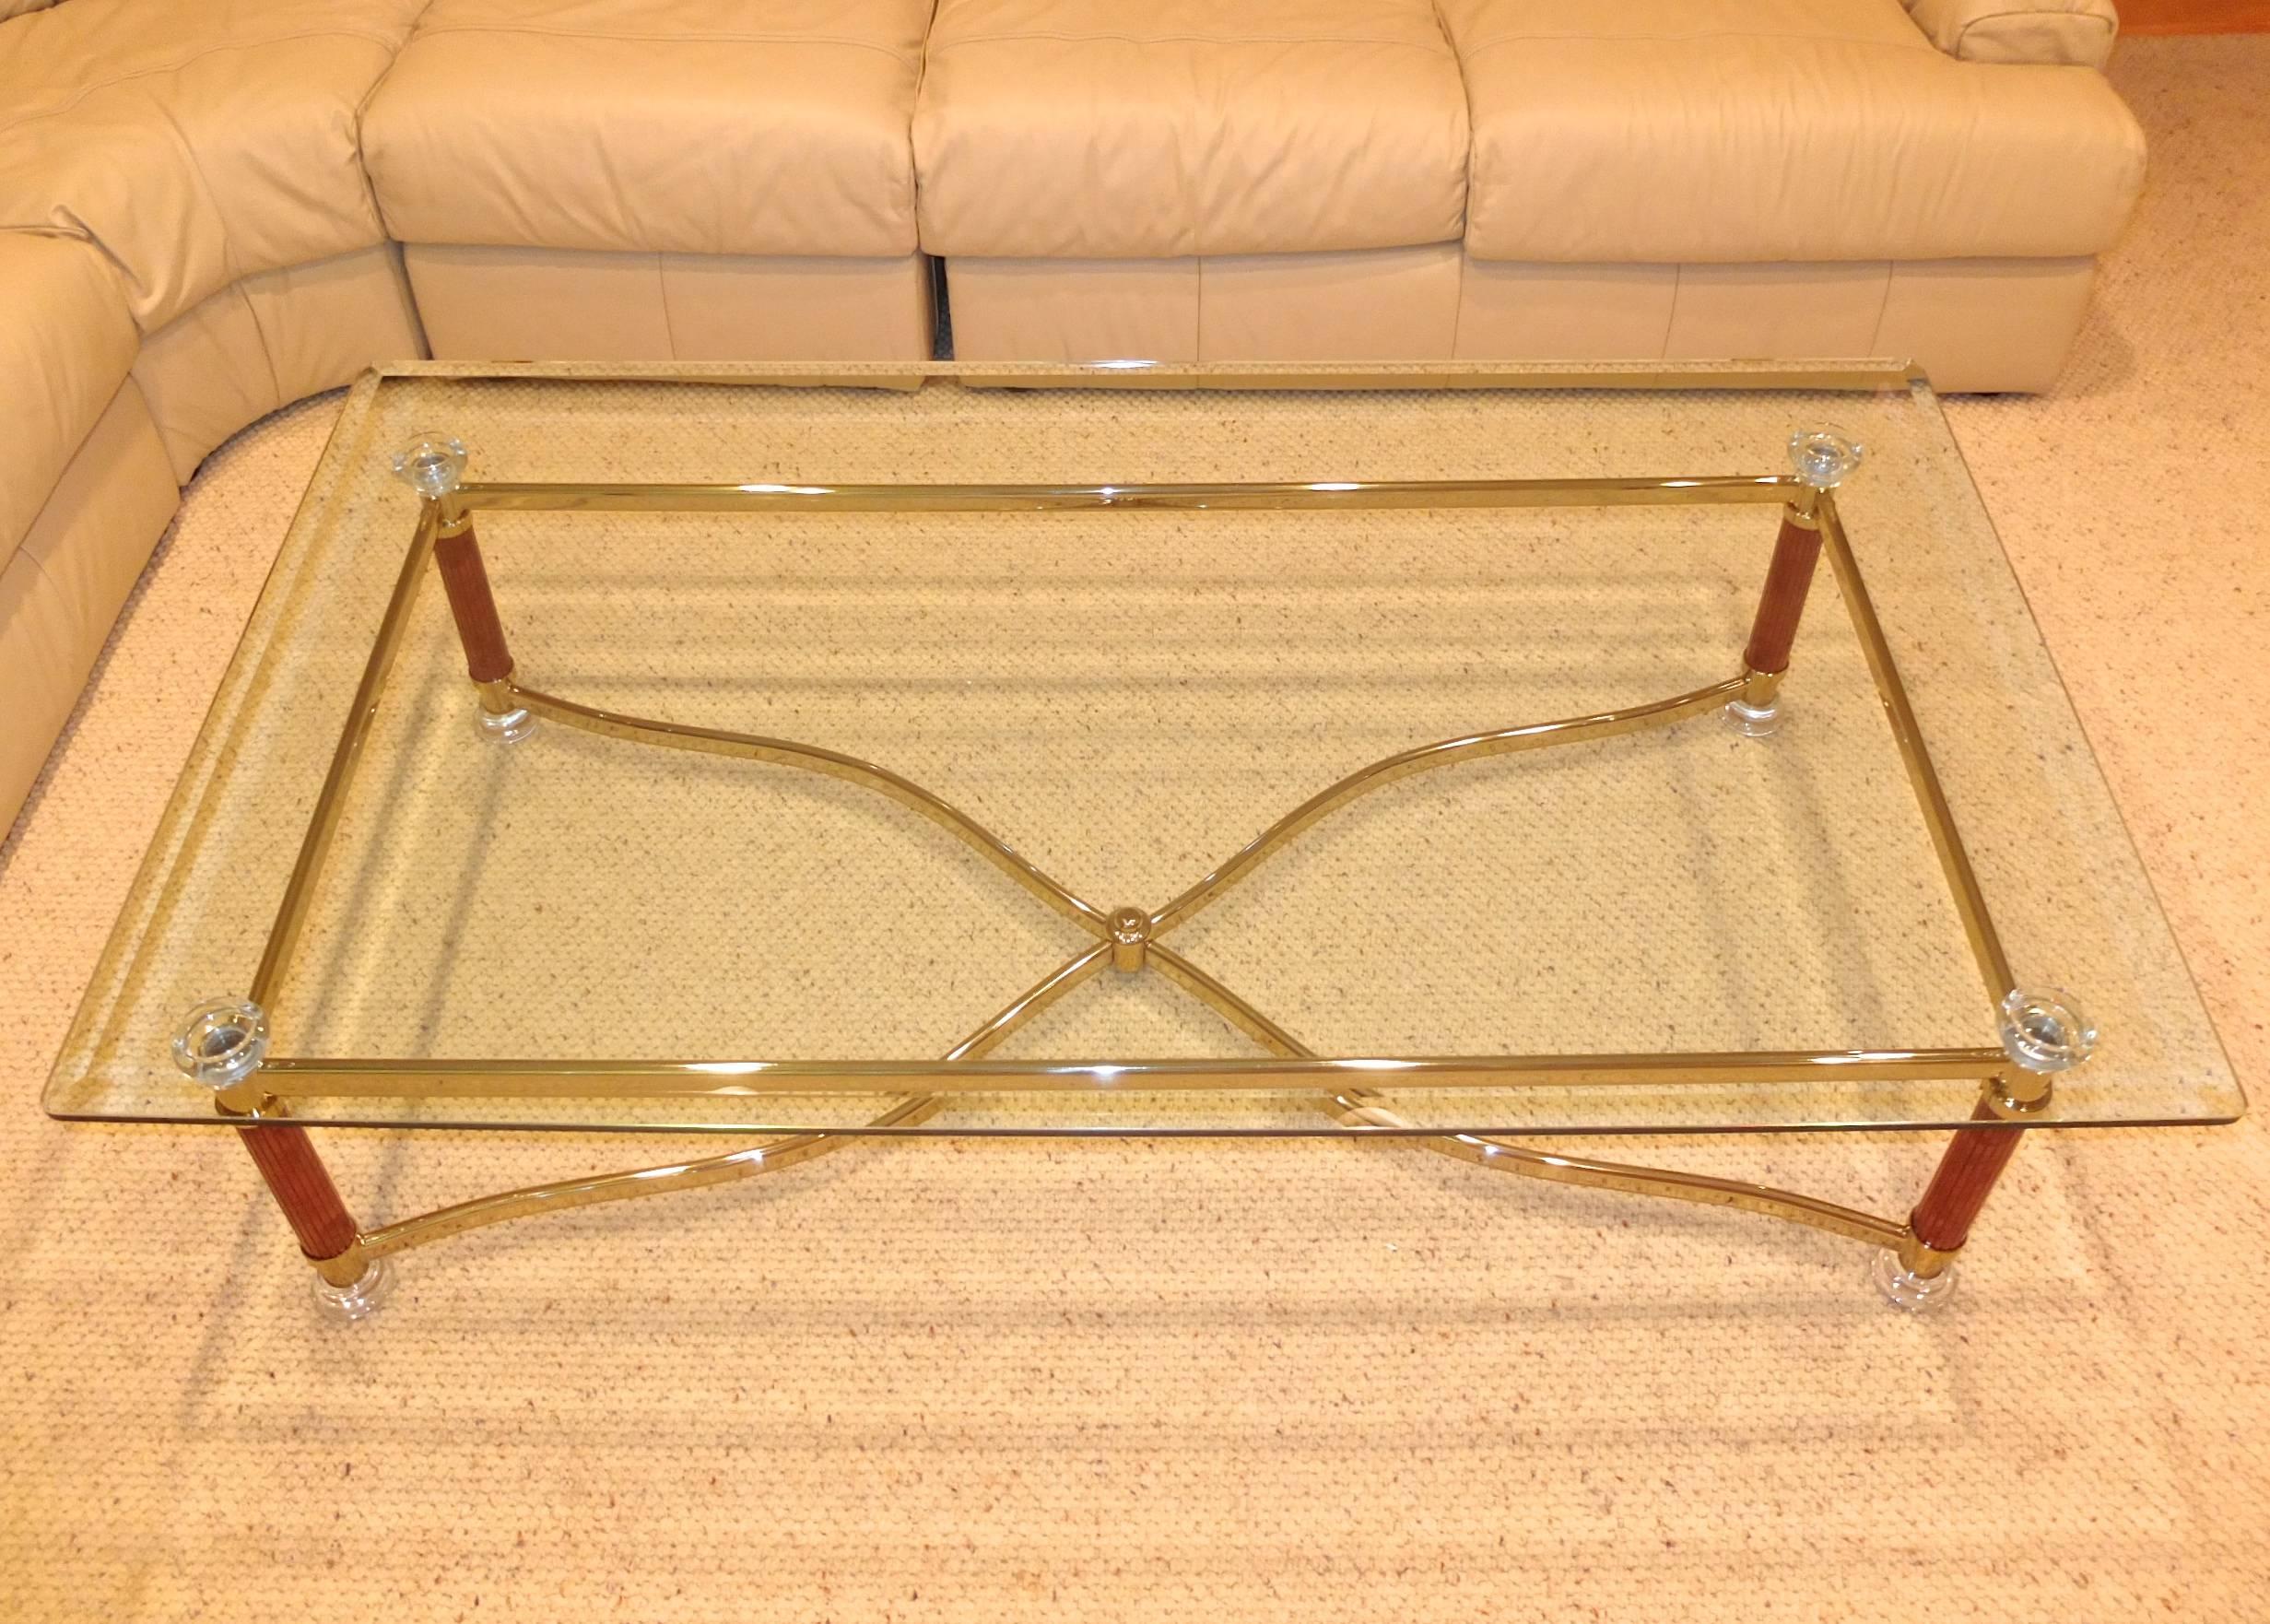 Rectangular beveled glass top cocktail table with four round column legs clad in tamboured faux jasper stone with round Lucite Doric capitols and feet, serpentine brass cruciform stretcher base and straight brass sides. 

Vintage early 1980s.